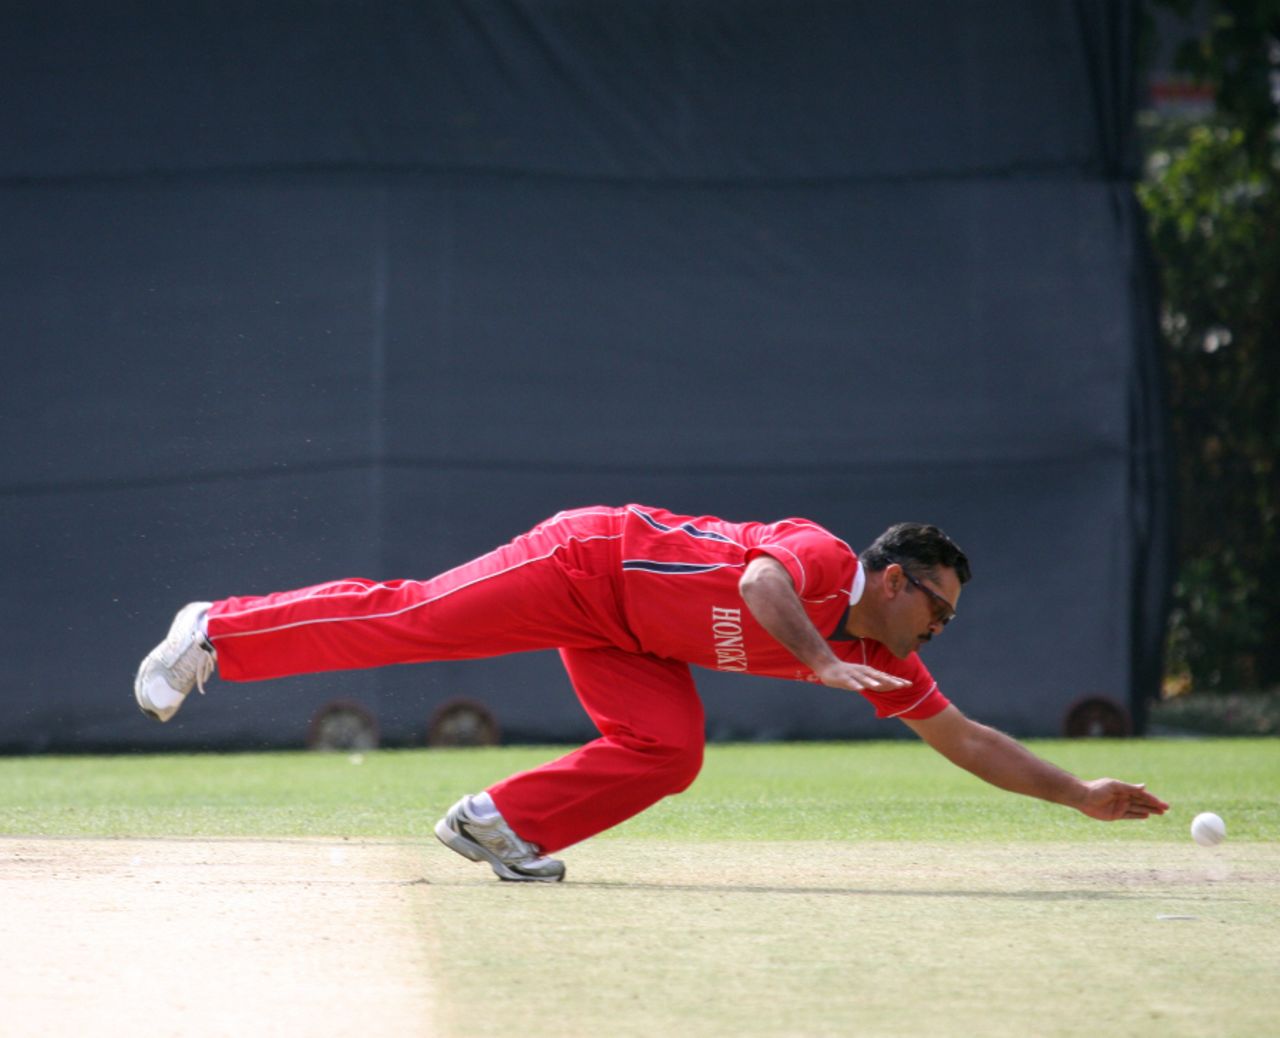 Munir Dar dives to field the ball off his own bowling during his parsimonious spell, Hong Kong v Papua New Guinea, WCL Division Three Final, Kowloon, January 29, 2011